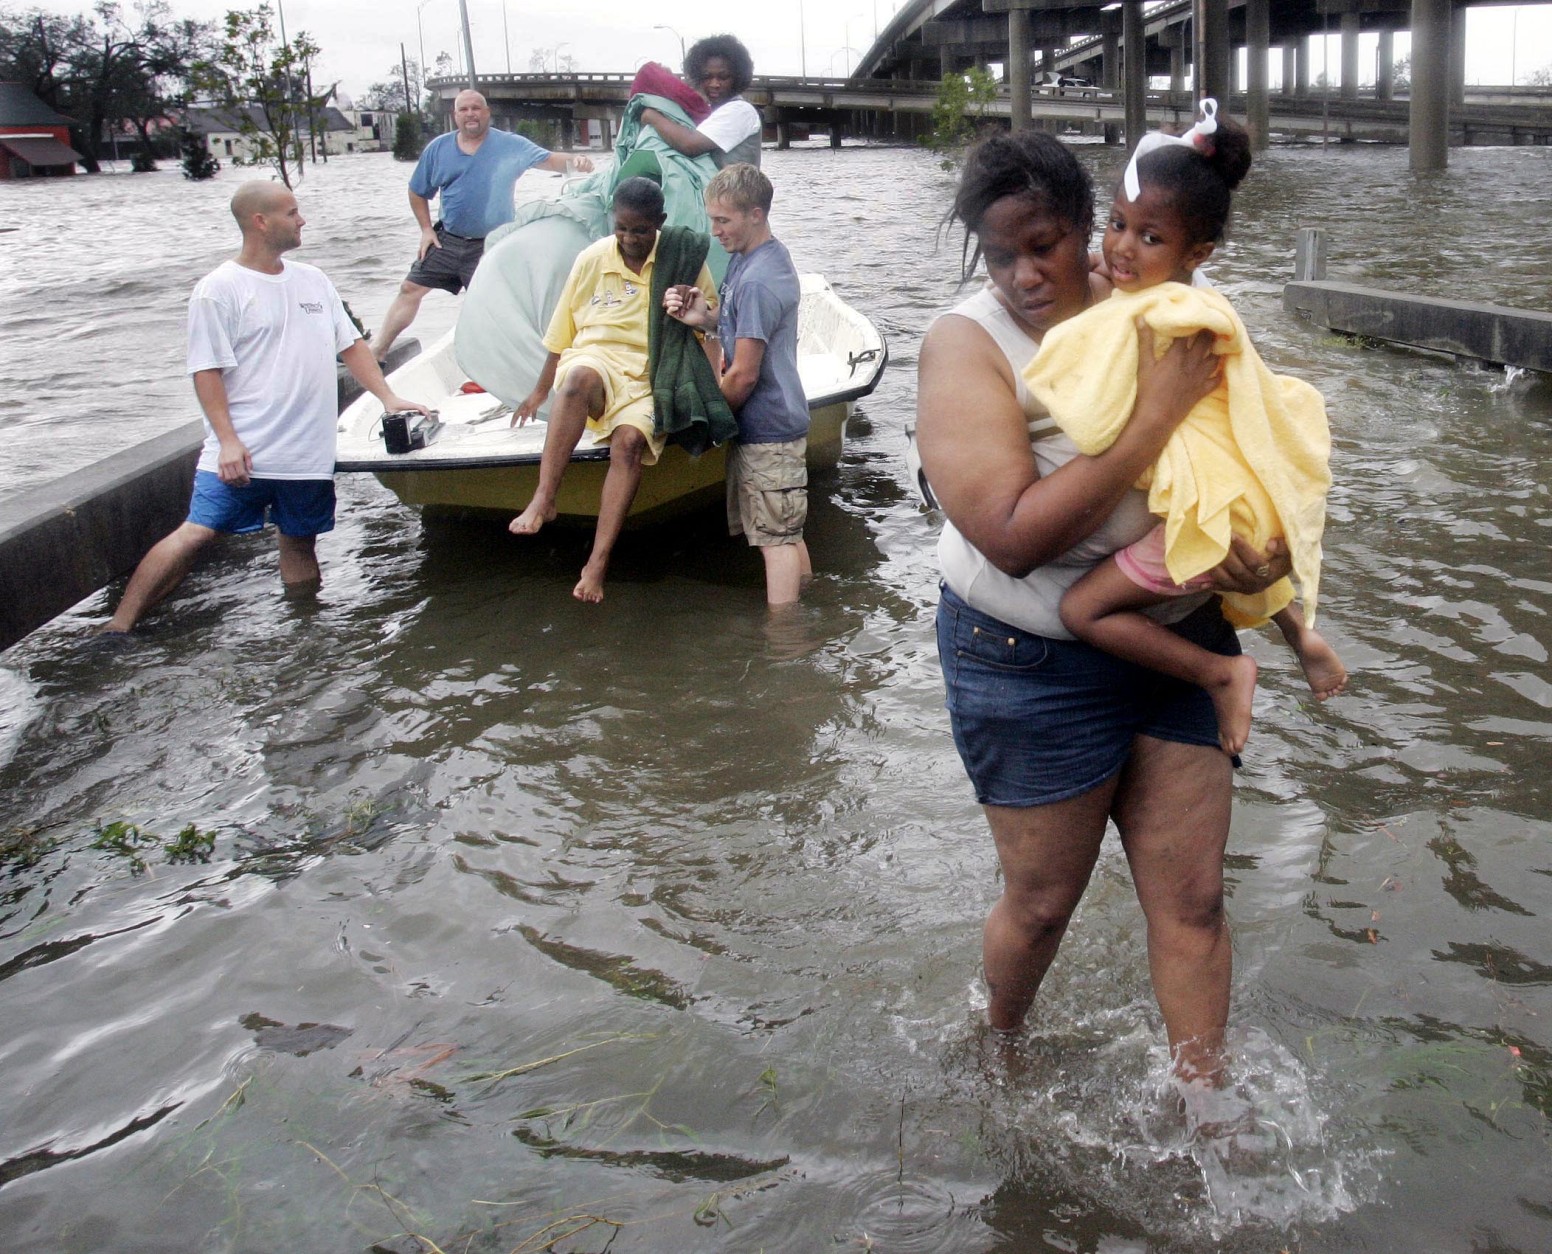 Shante Gruld carries Janeka Garner, 5, to safety after they were rescued from their flooded home by boat  in  New Orleans,  Monday Morning, Aug. 29,  2005. The area was flooded after Hurricane Katrina hit the area. Officials had  called for a mandatory evacuation of the city, but many resident remained in the city.  (AP Photo/Eric Gay)